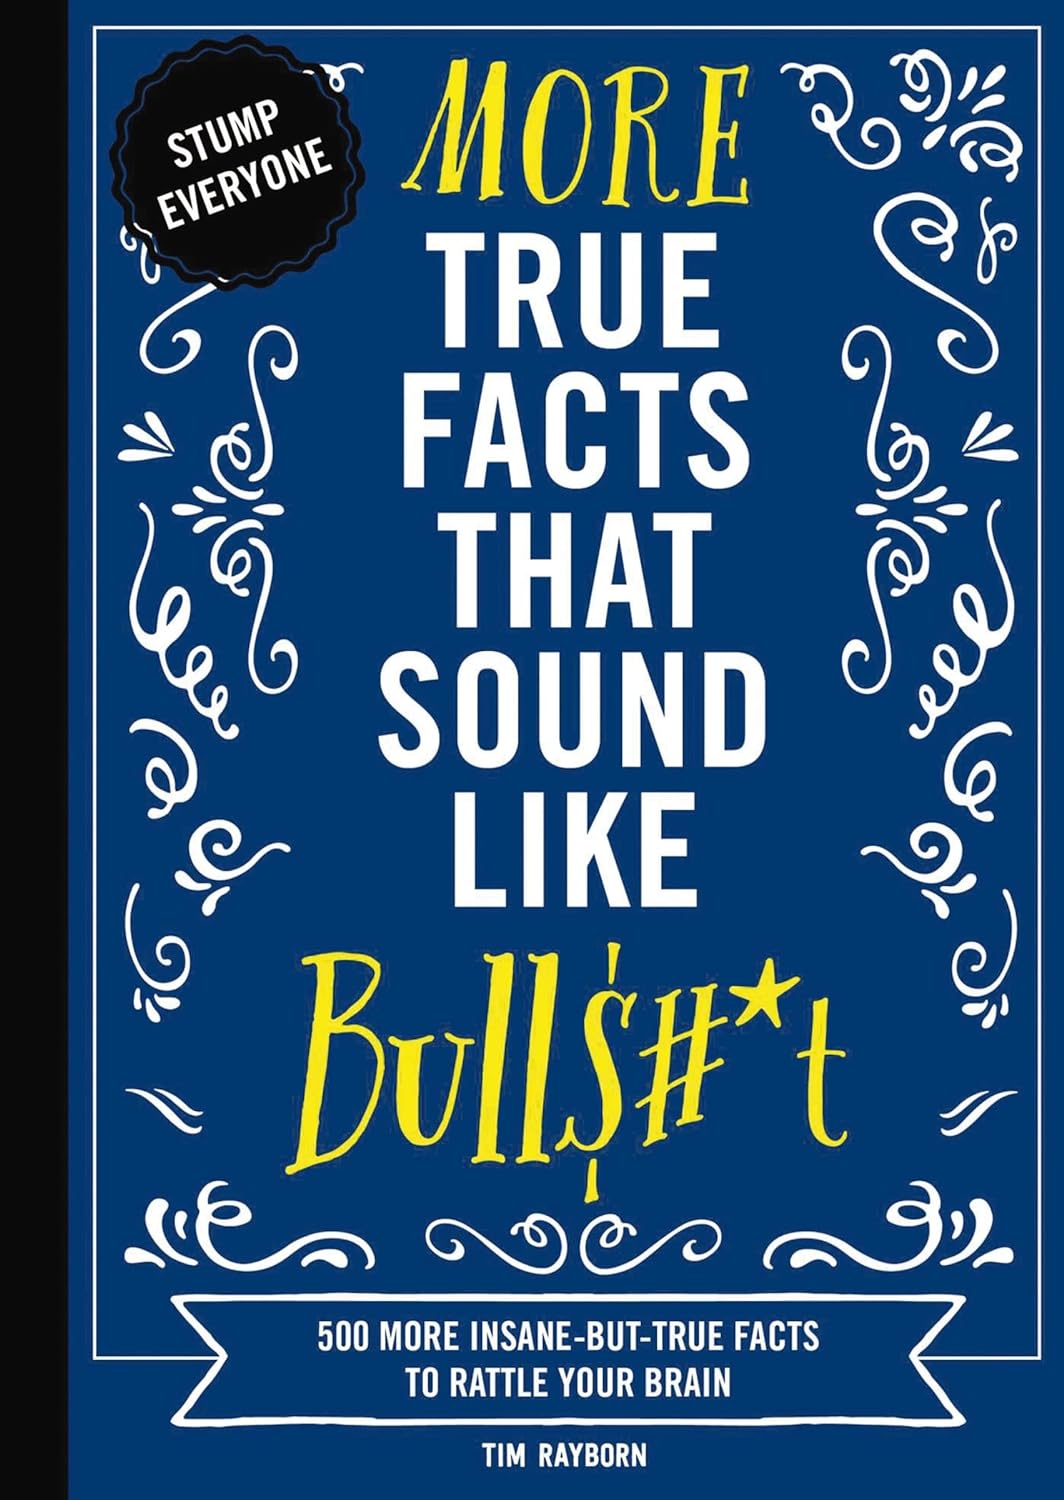 More True Facts That Sound Like Bull$#t 500 More Insane-But-True Facts to Rattle Your Brain 2 (Mind-Blowing True Facts #2) - SureShot Books Publishing LLC